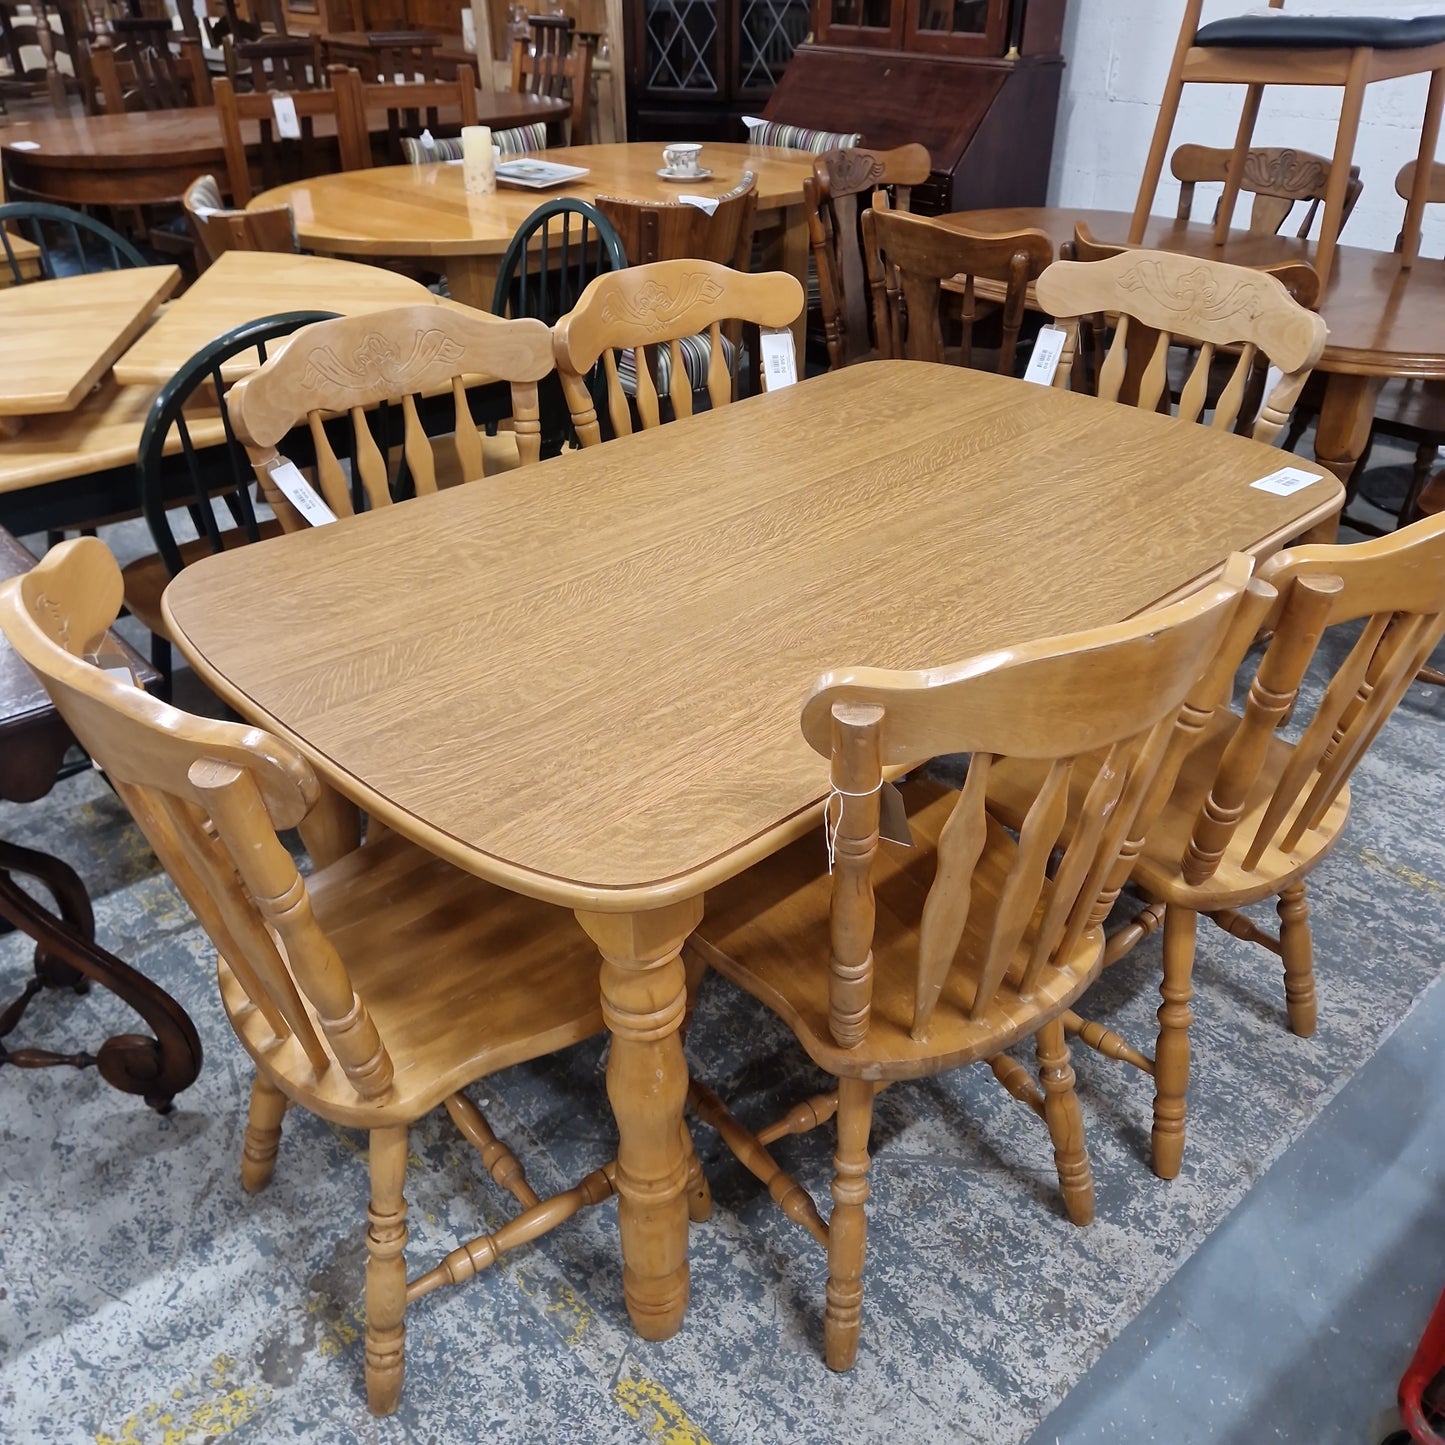 Oak laminate rectangular kitchen table with 6 no. matching chairs